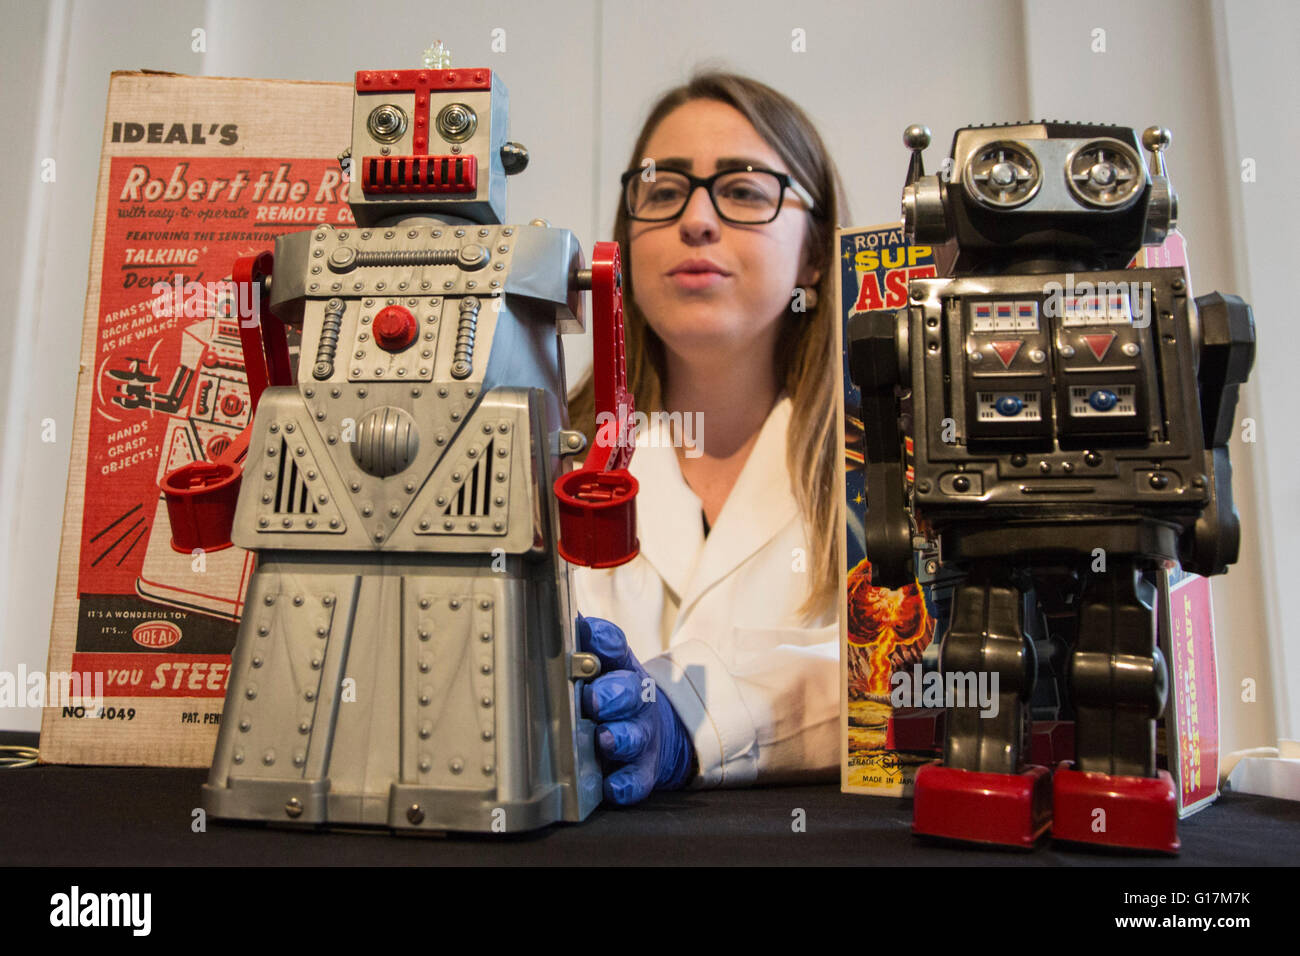 London, UK. 10 May 2016. Pictured: conservator Vanessa Applebaum handles toy robots Robert the Robot and the Super Astronaut Robot. The London Science Museum announces Rise of the Robots, the remarkable 500-year history of robots, in a new exhibition starting February 2017. Over 100 robots will feature in the exhibition which makes it the most significant collection of humanoid robots ever displayed in the world. Stock Photo